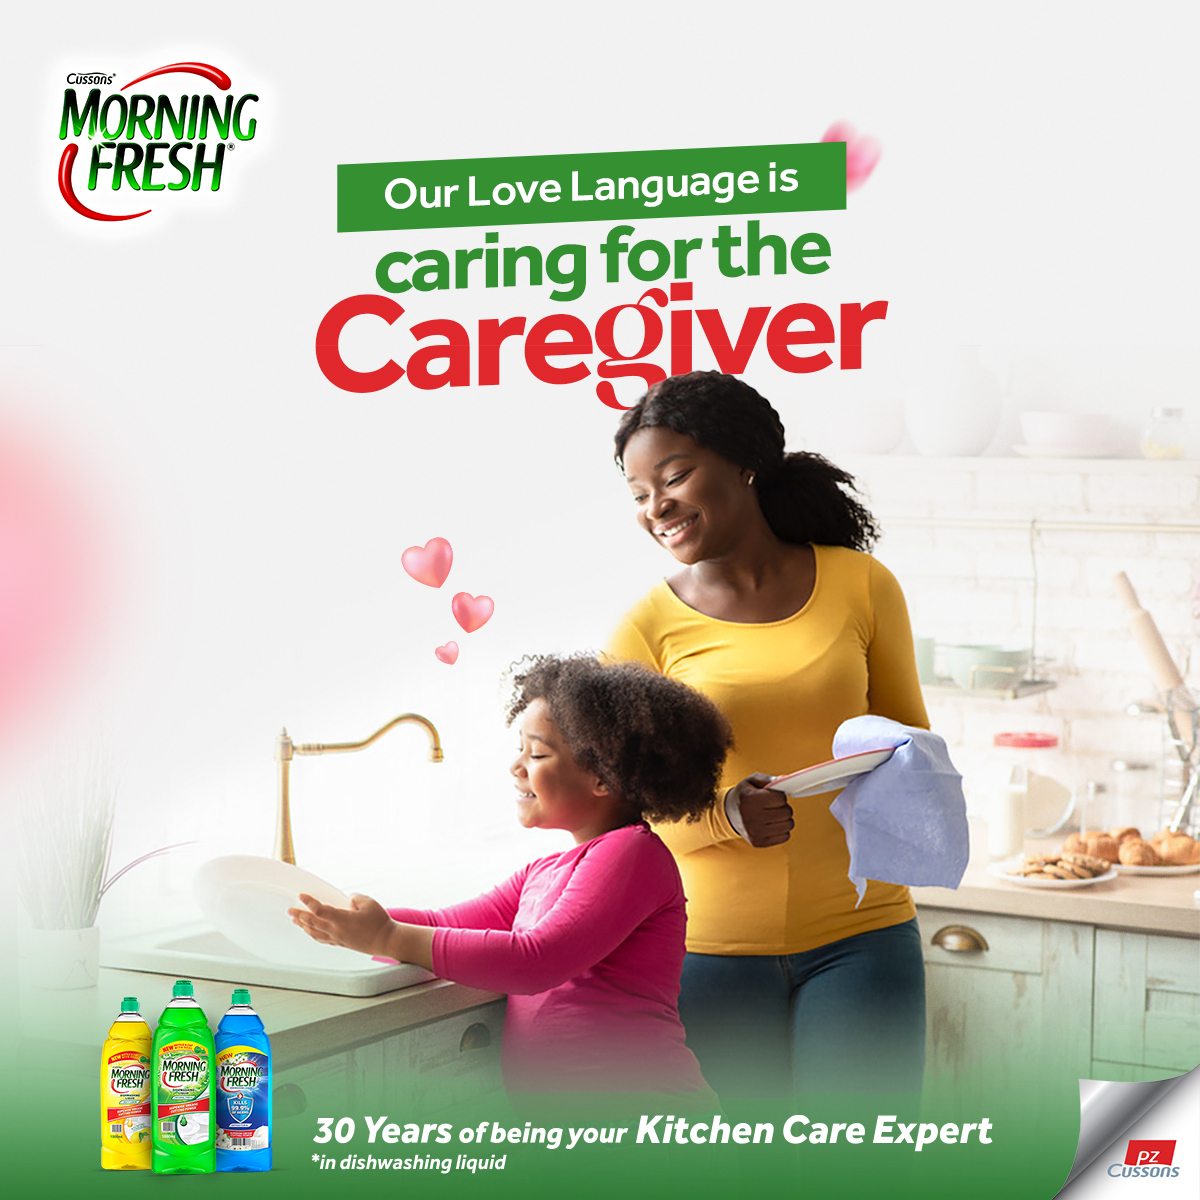 Softening the tough jobs is how we show up for you within and outside the kitchen. We are here for you! We are here to care for the caregiver.
#CaringFortheCaregiver #KitchenCareExpert #MorningFreshis30